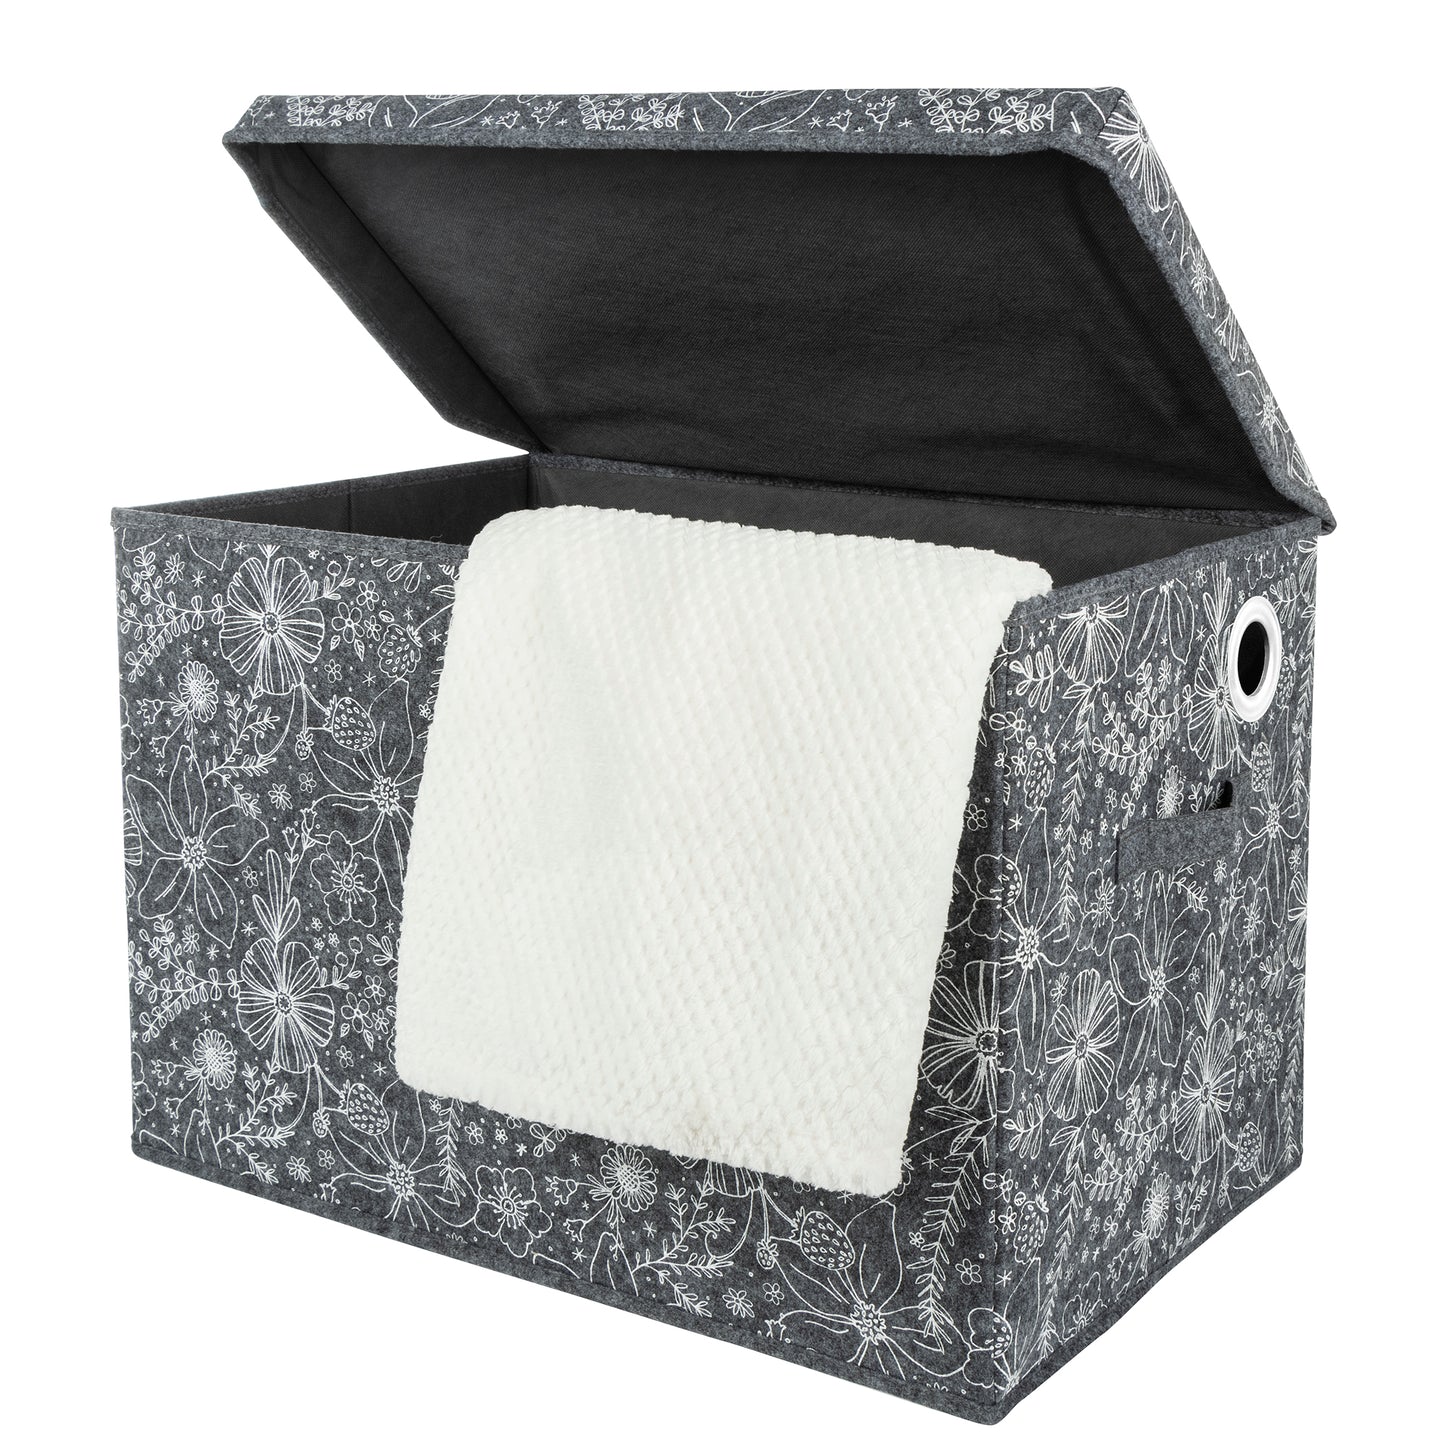 Floral Felt Toy Box by Sammy & Lou® Angled with lid open with white towel hanging out.